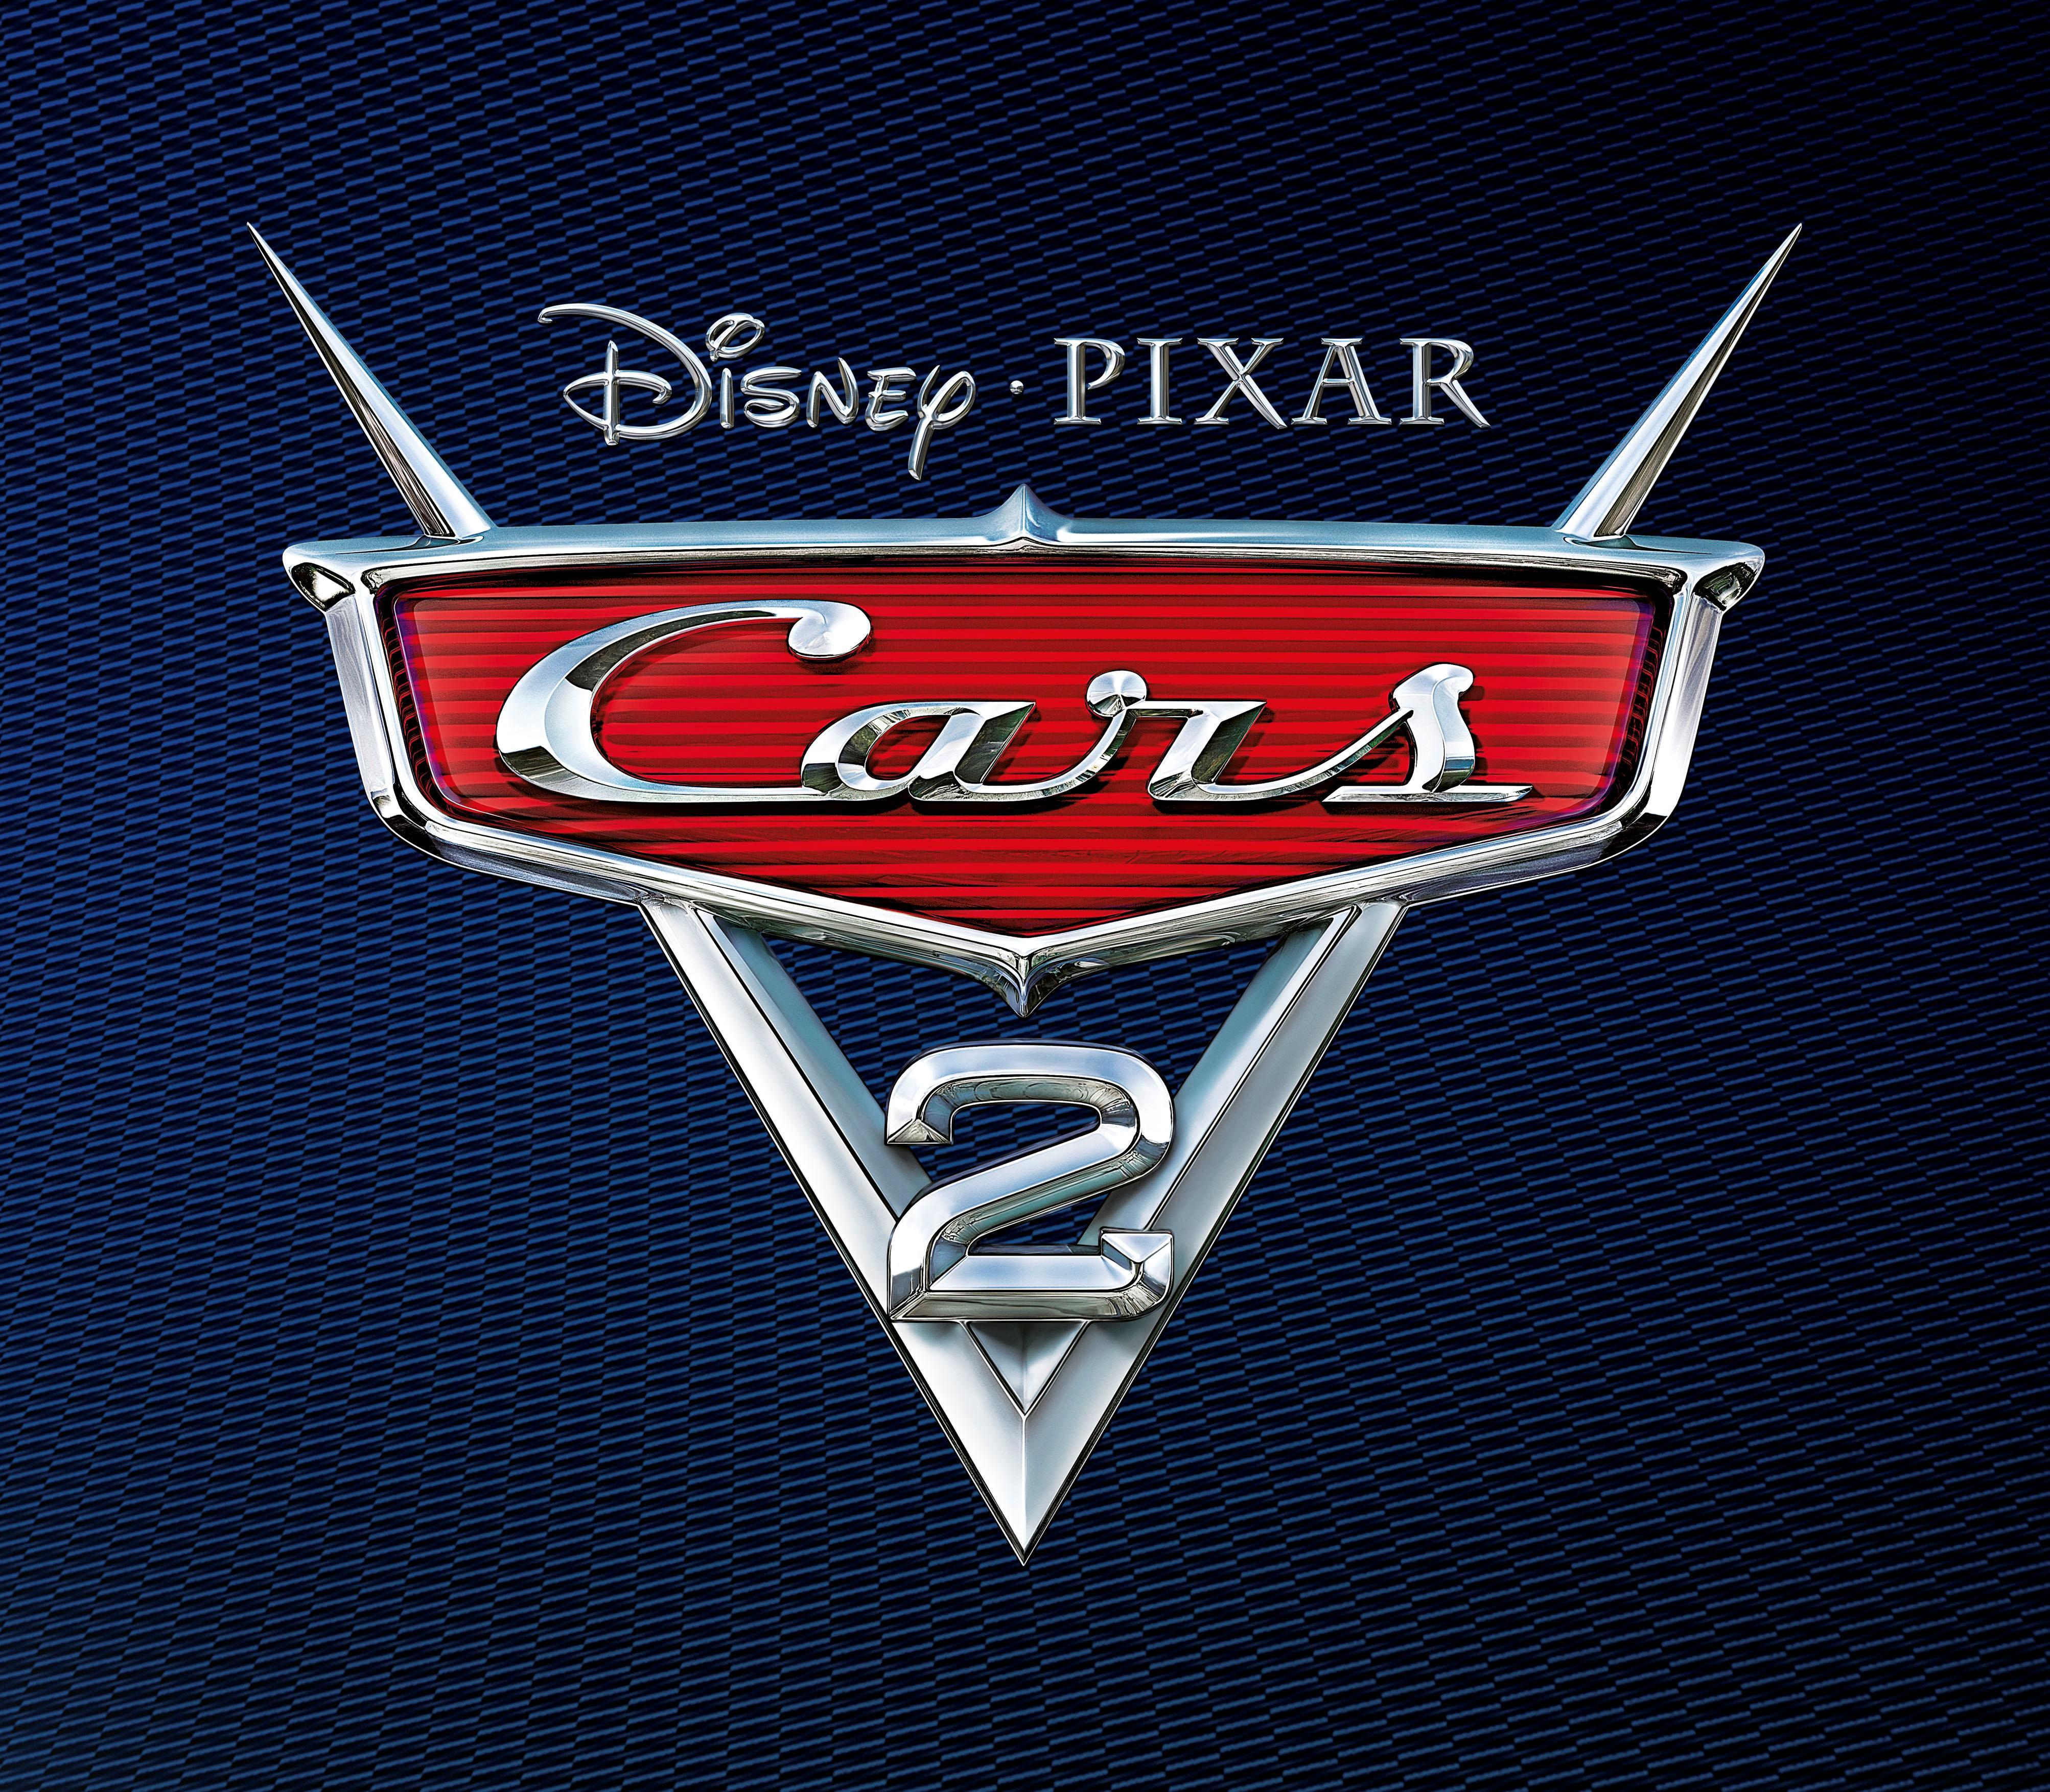 Cars 2 Movie Logo - Nuffnang Singapore | Asia Pacific's First Blog Advertising Community ...